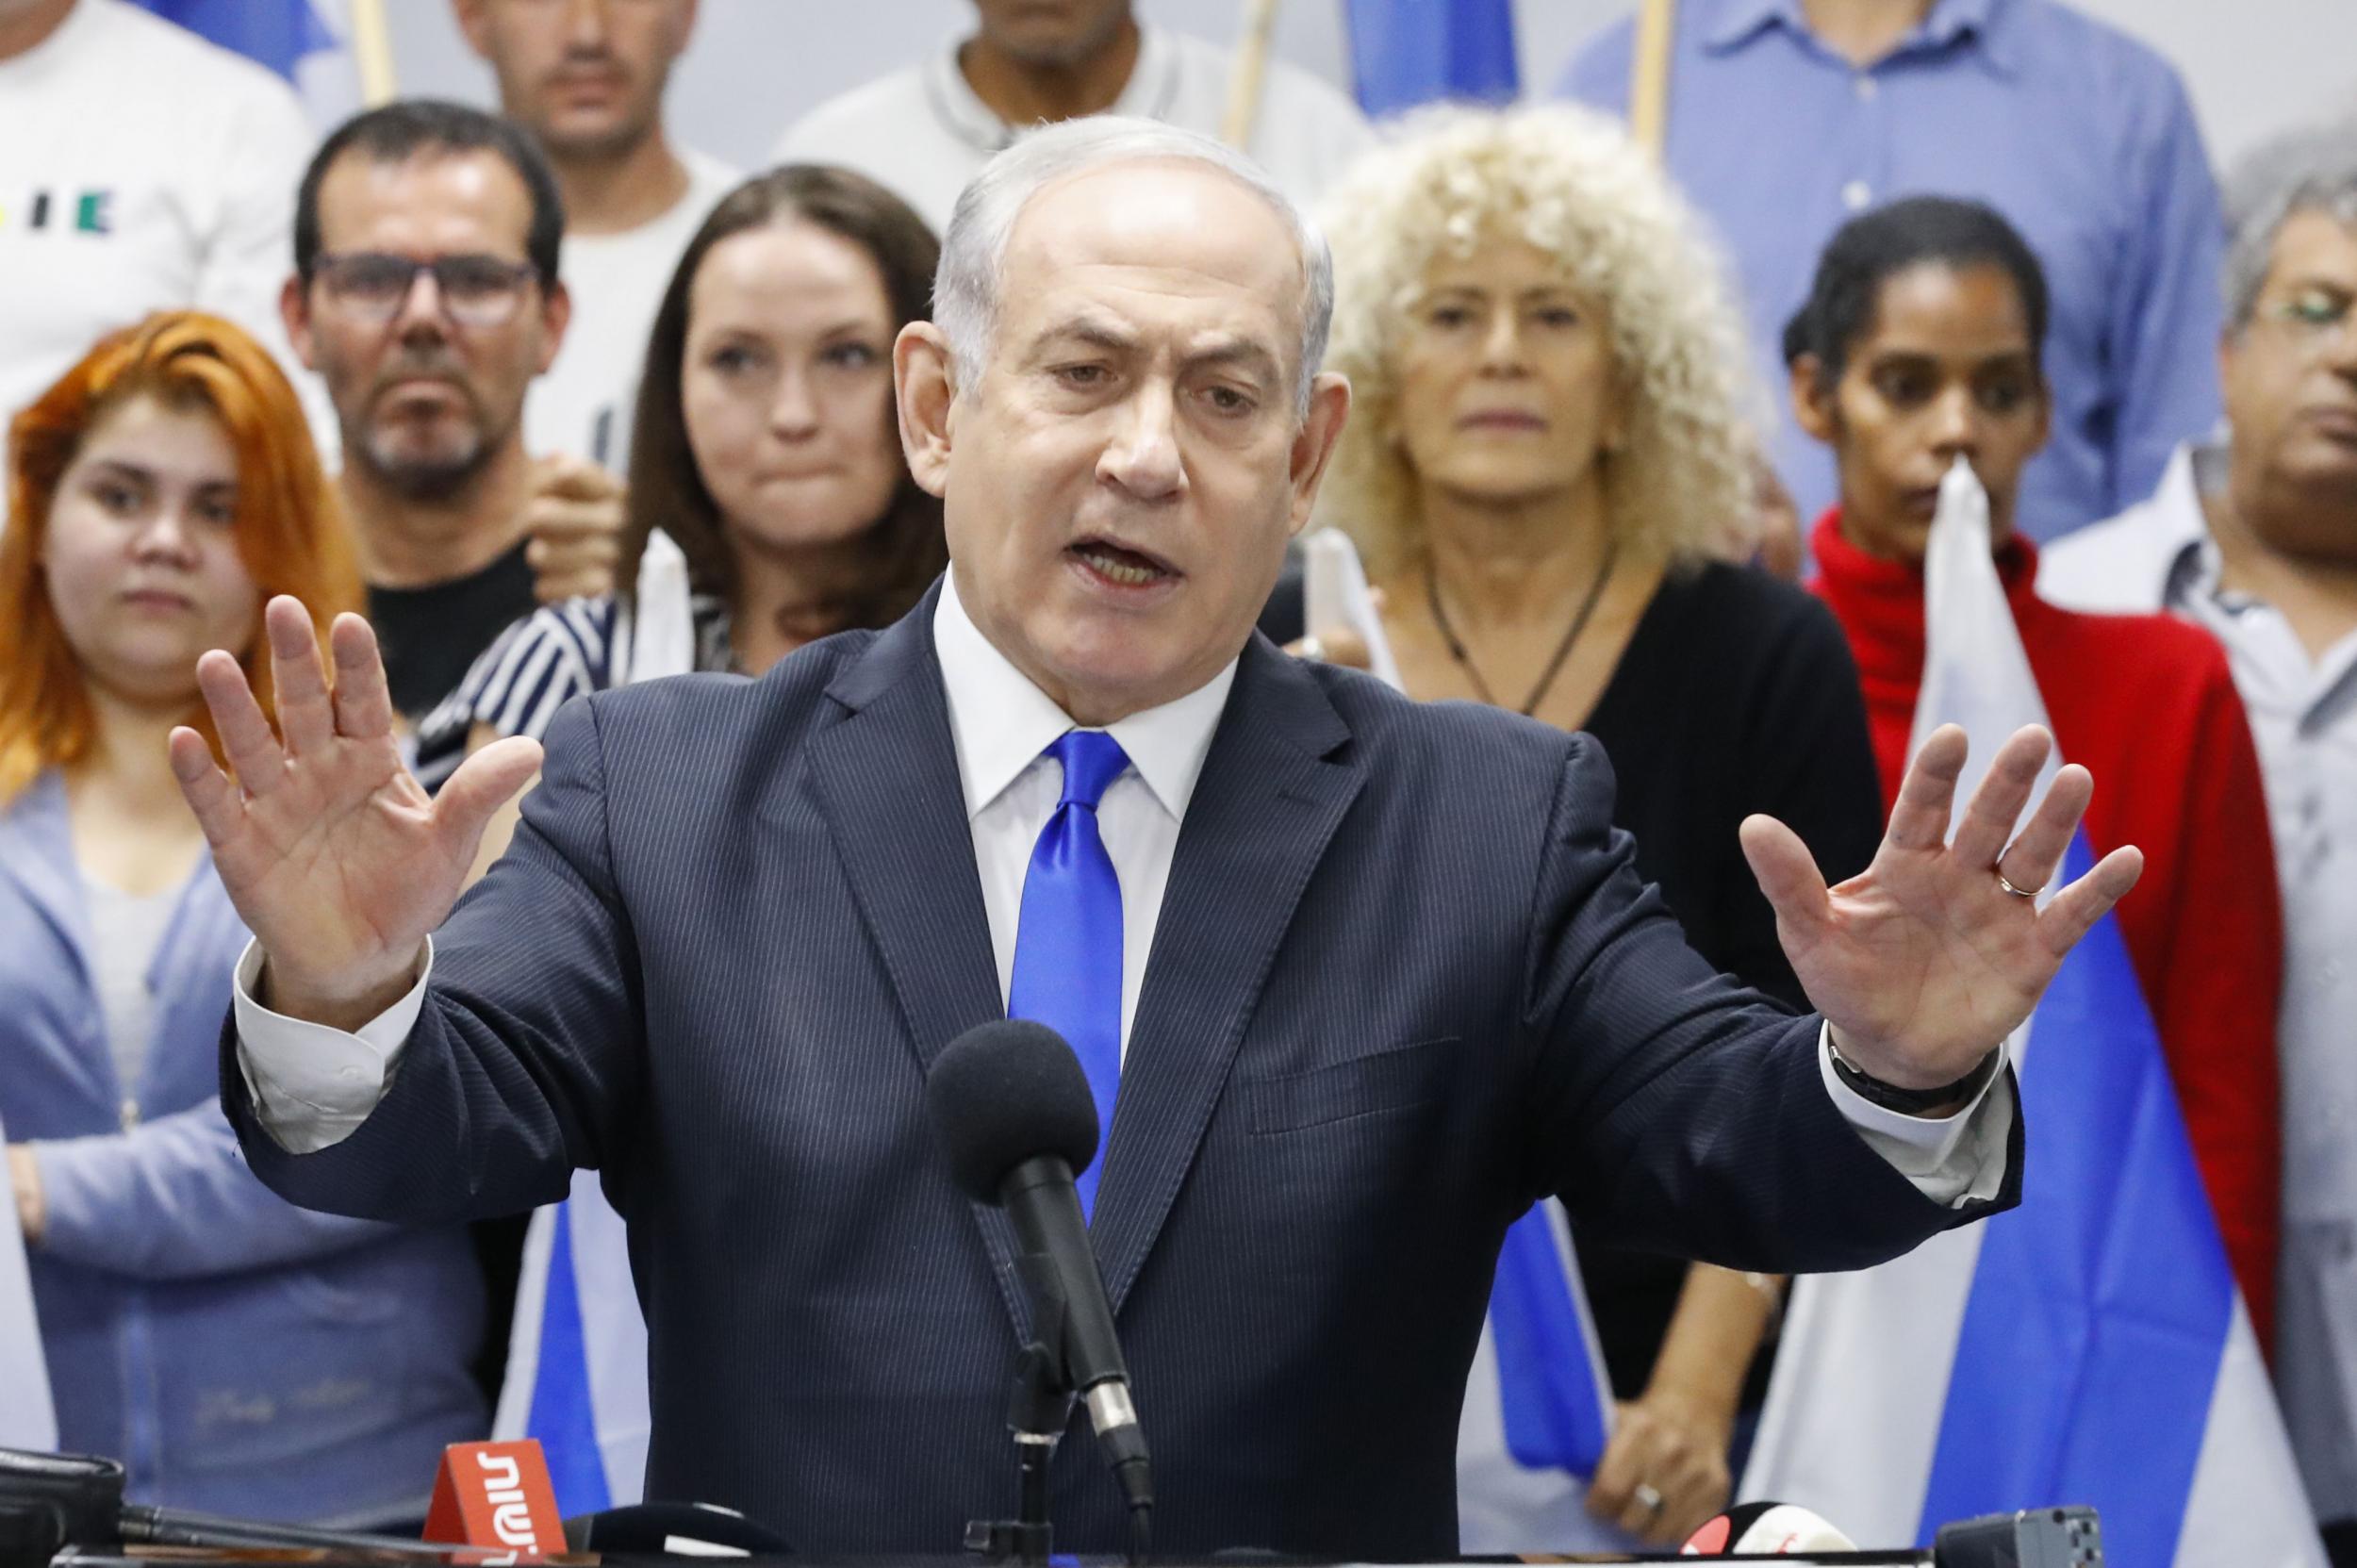 Not a single woman participated in any of the failed coalition talks with Netanyahu's government